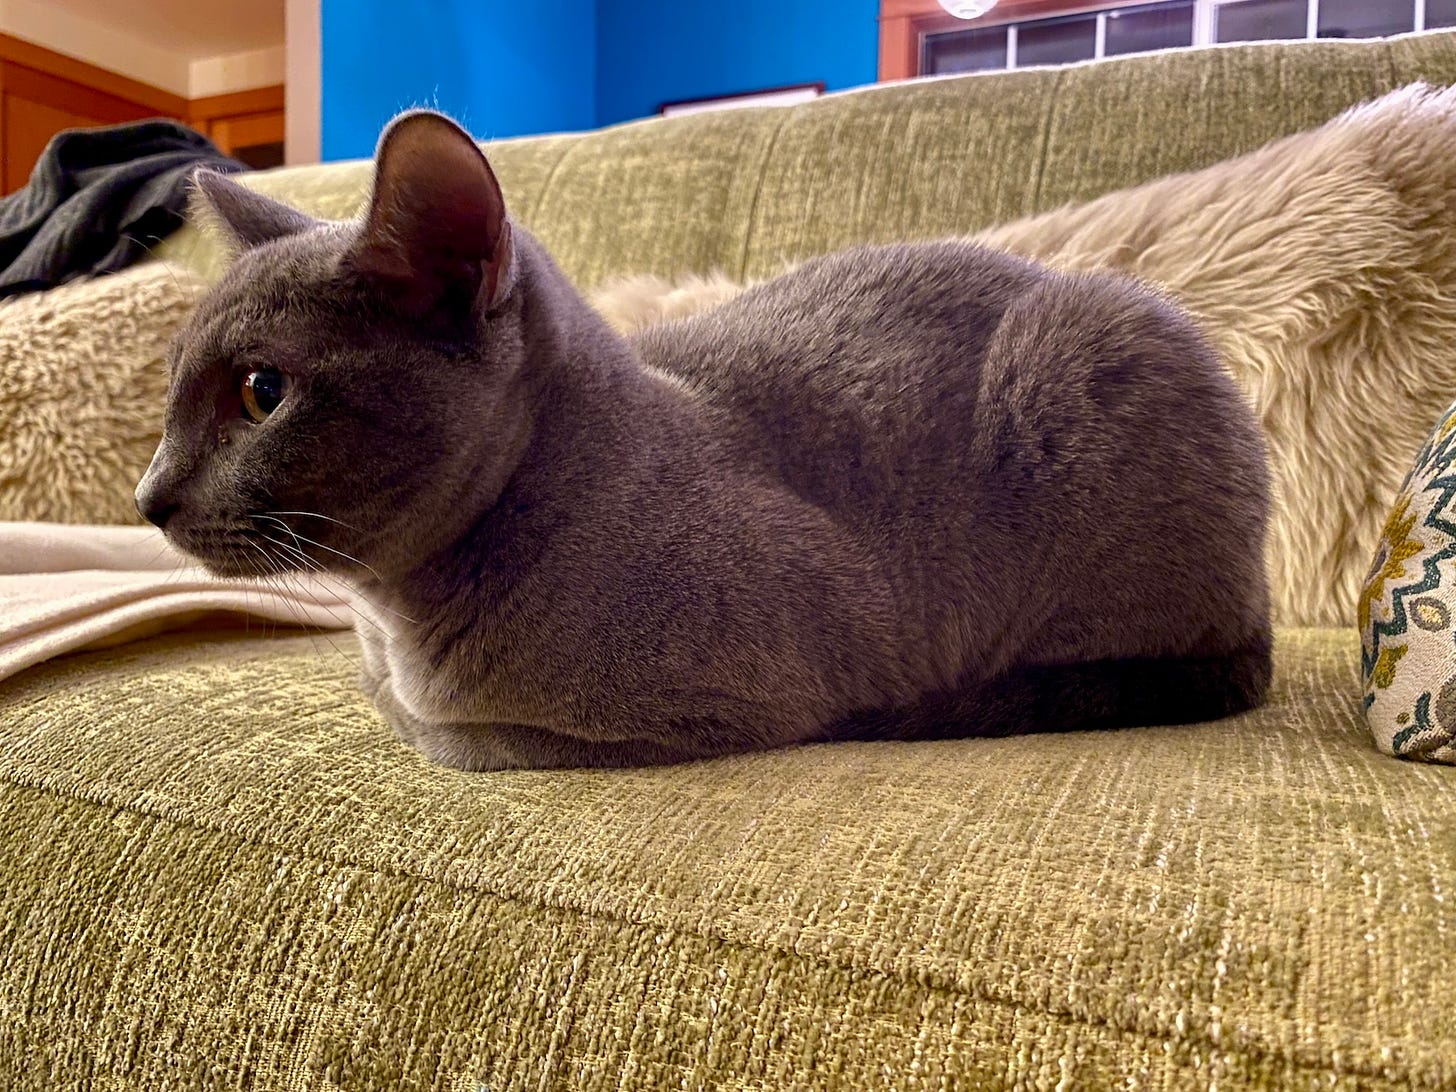 A photo of a dark gray cat sitting on a pale green couch. Her paws are tucked under her body.